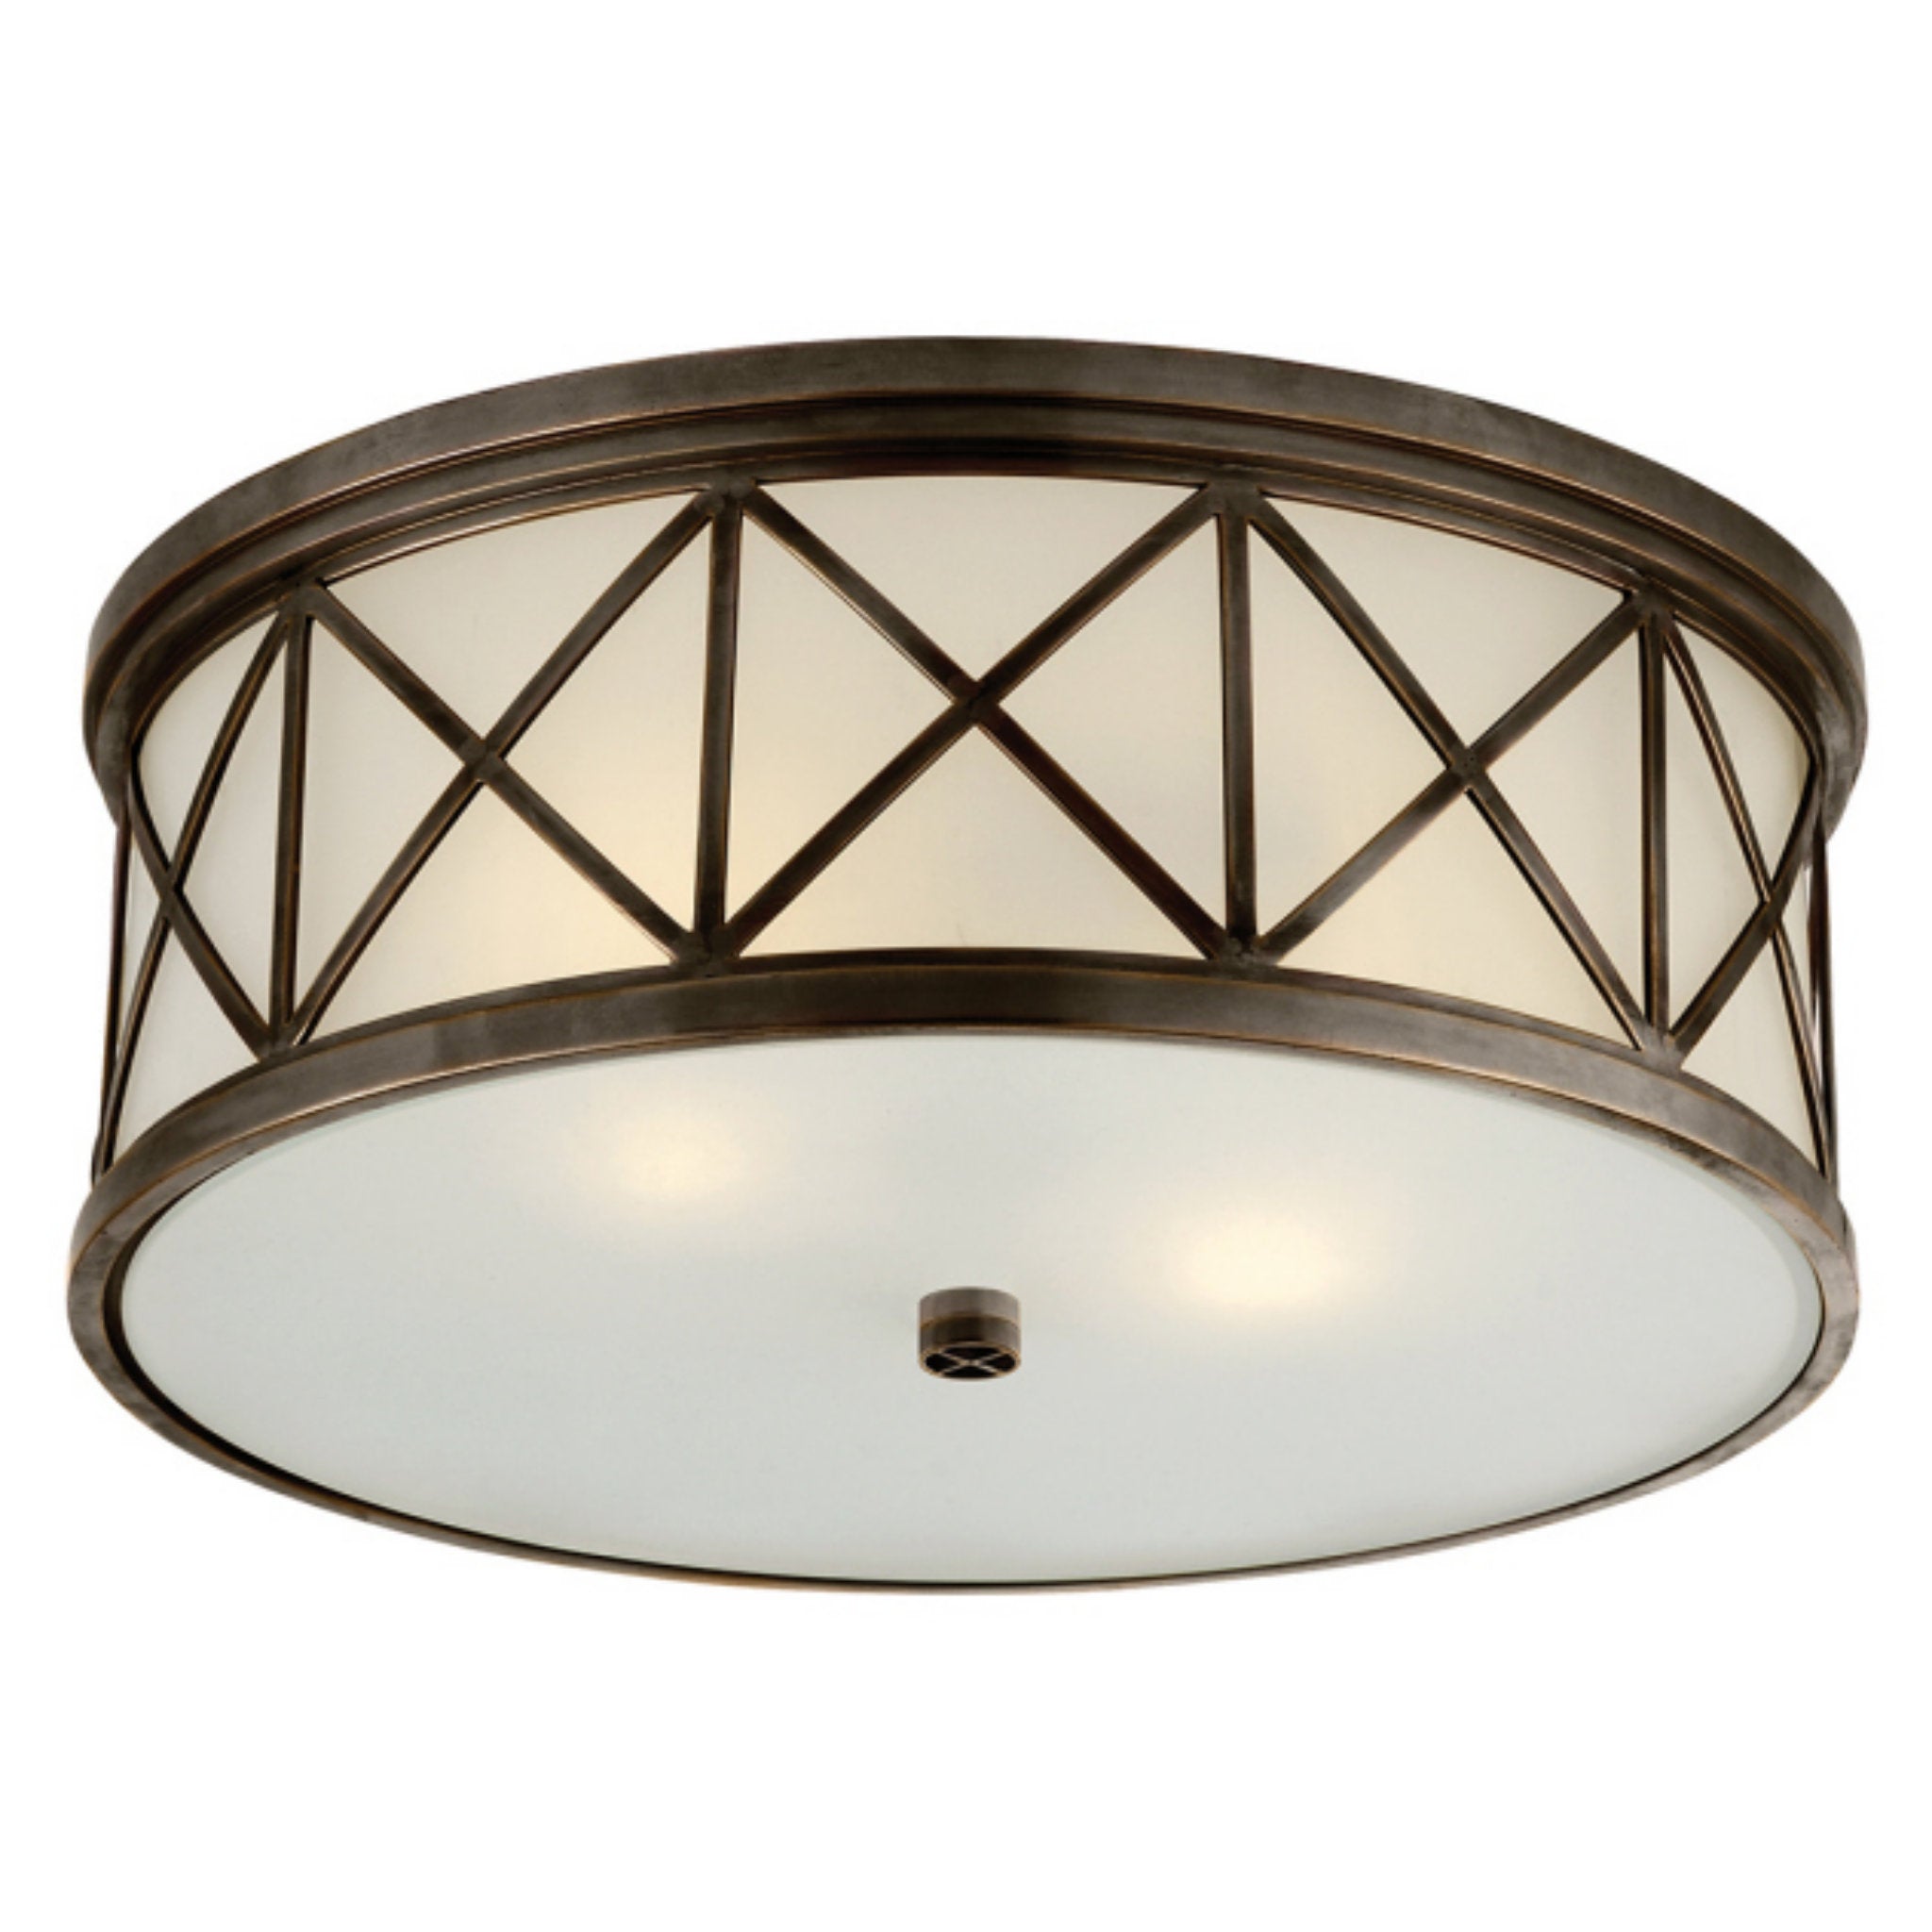 Suzanne Kasler Montpelier Large Flush Mount in Bronze with Frosted Glass